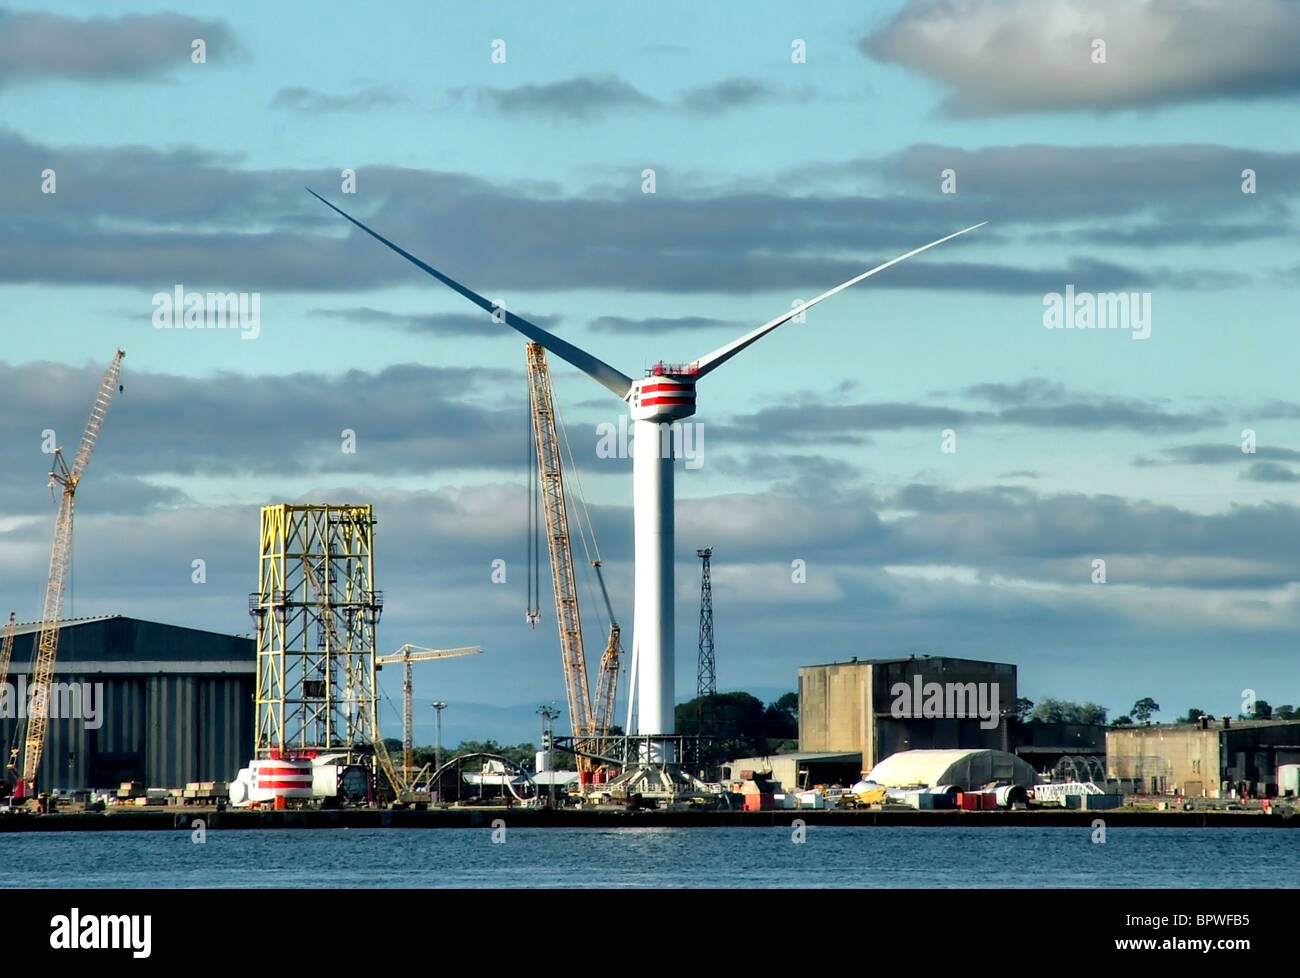 A giant off-shore wind turbine assembled and ready for installation at the Nigg Yard, Cromarty Firth. Stock Photo